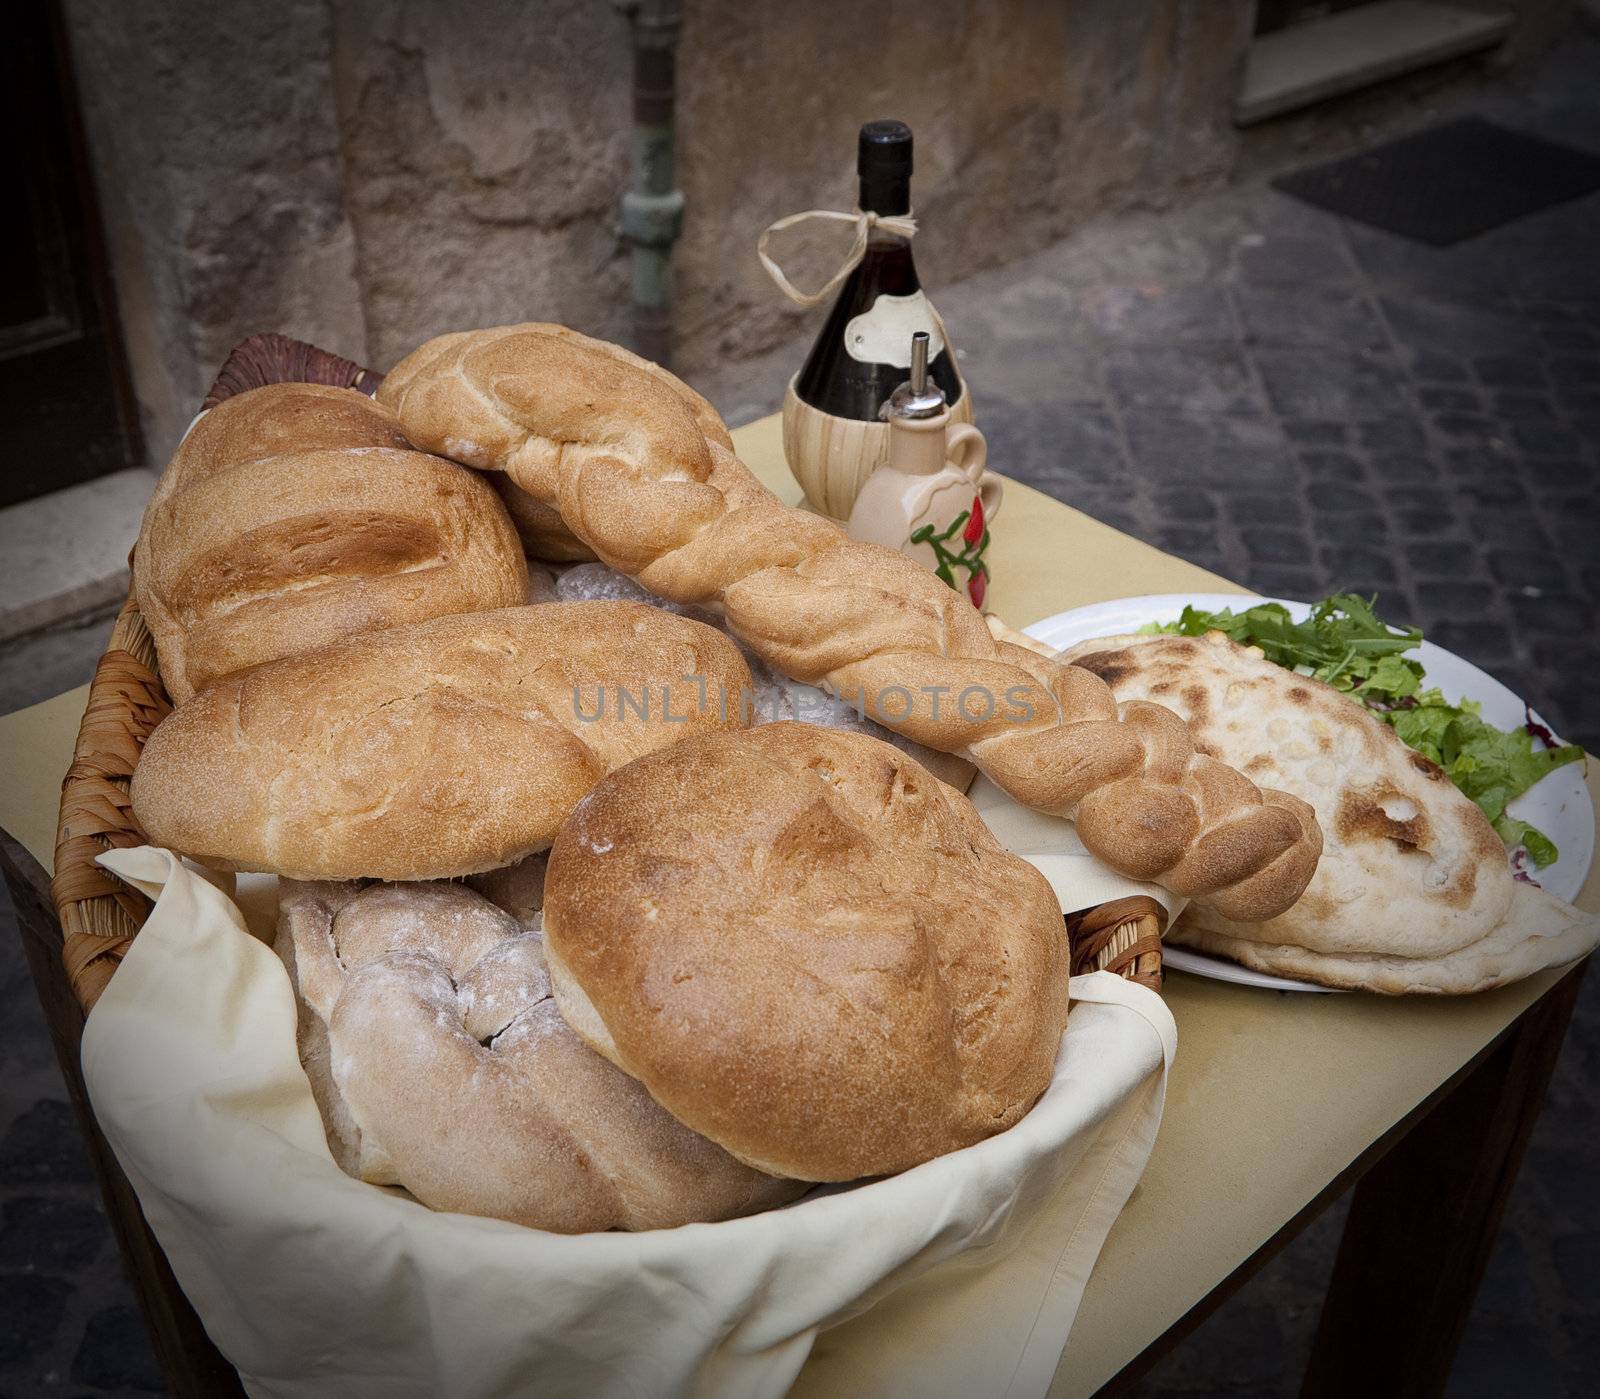 Various loaves in a basket and a bottle of wine seen outside a Roman restaurant.